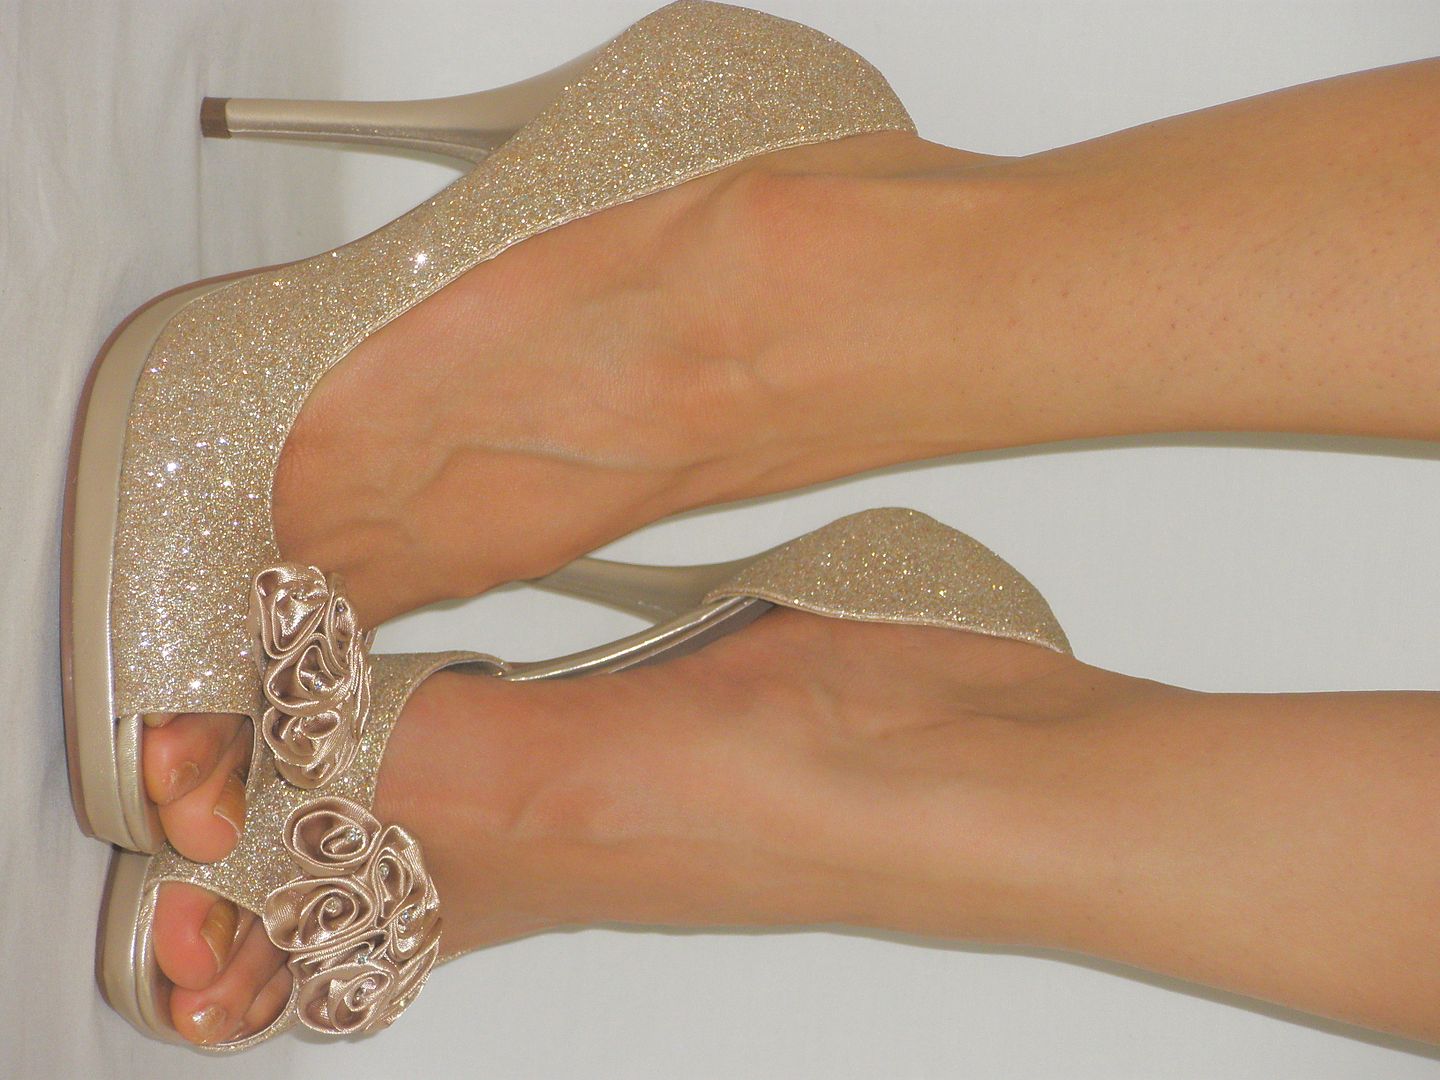 Gold Sparkly Pumps….Any Ideas Bees? Photo Share - Weddingbee